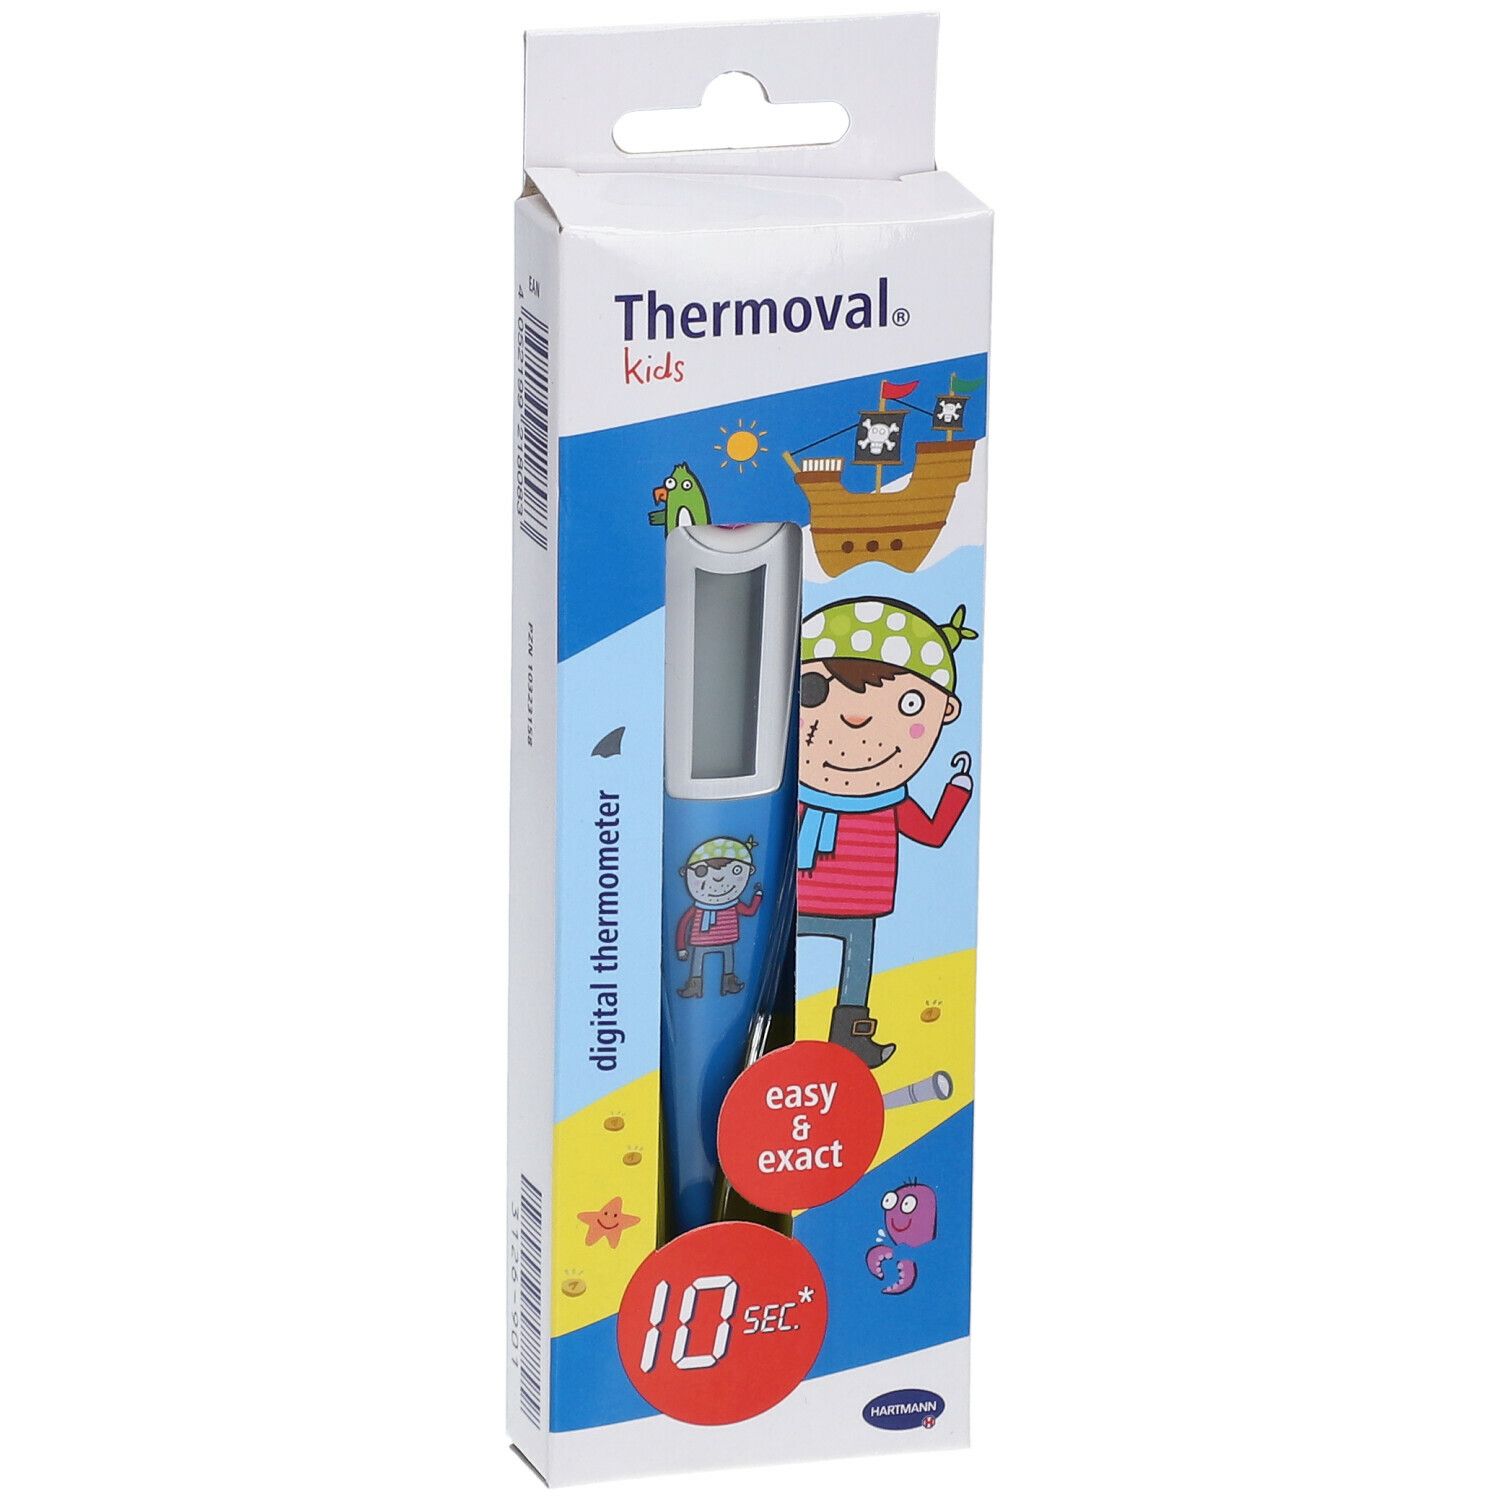 Thermoval® Kids